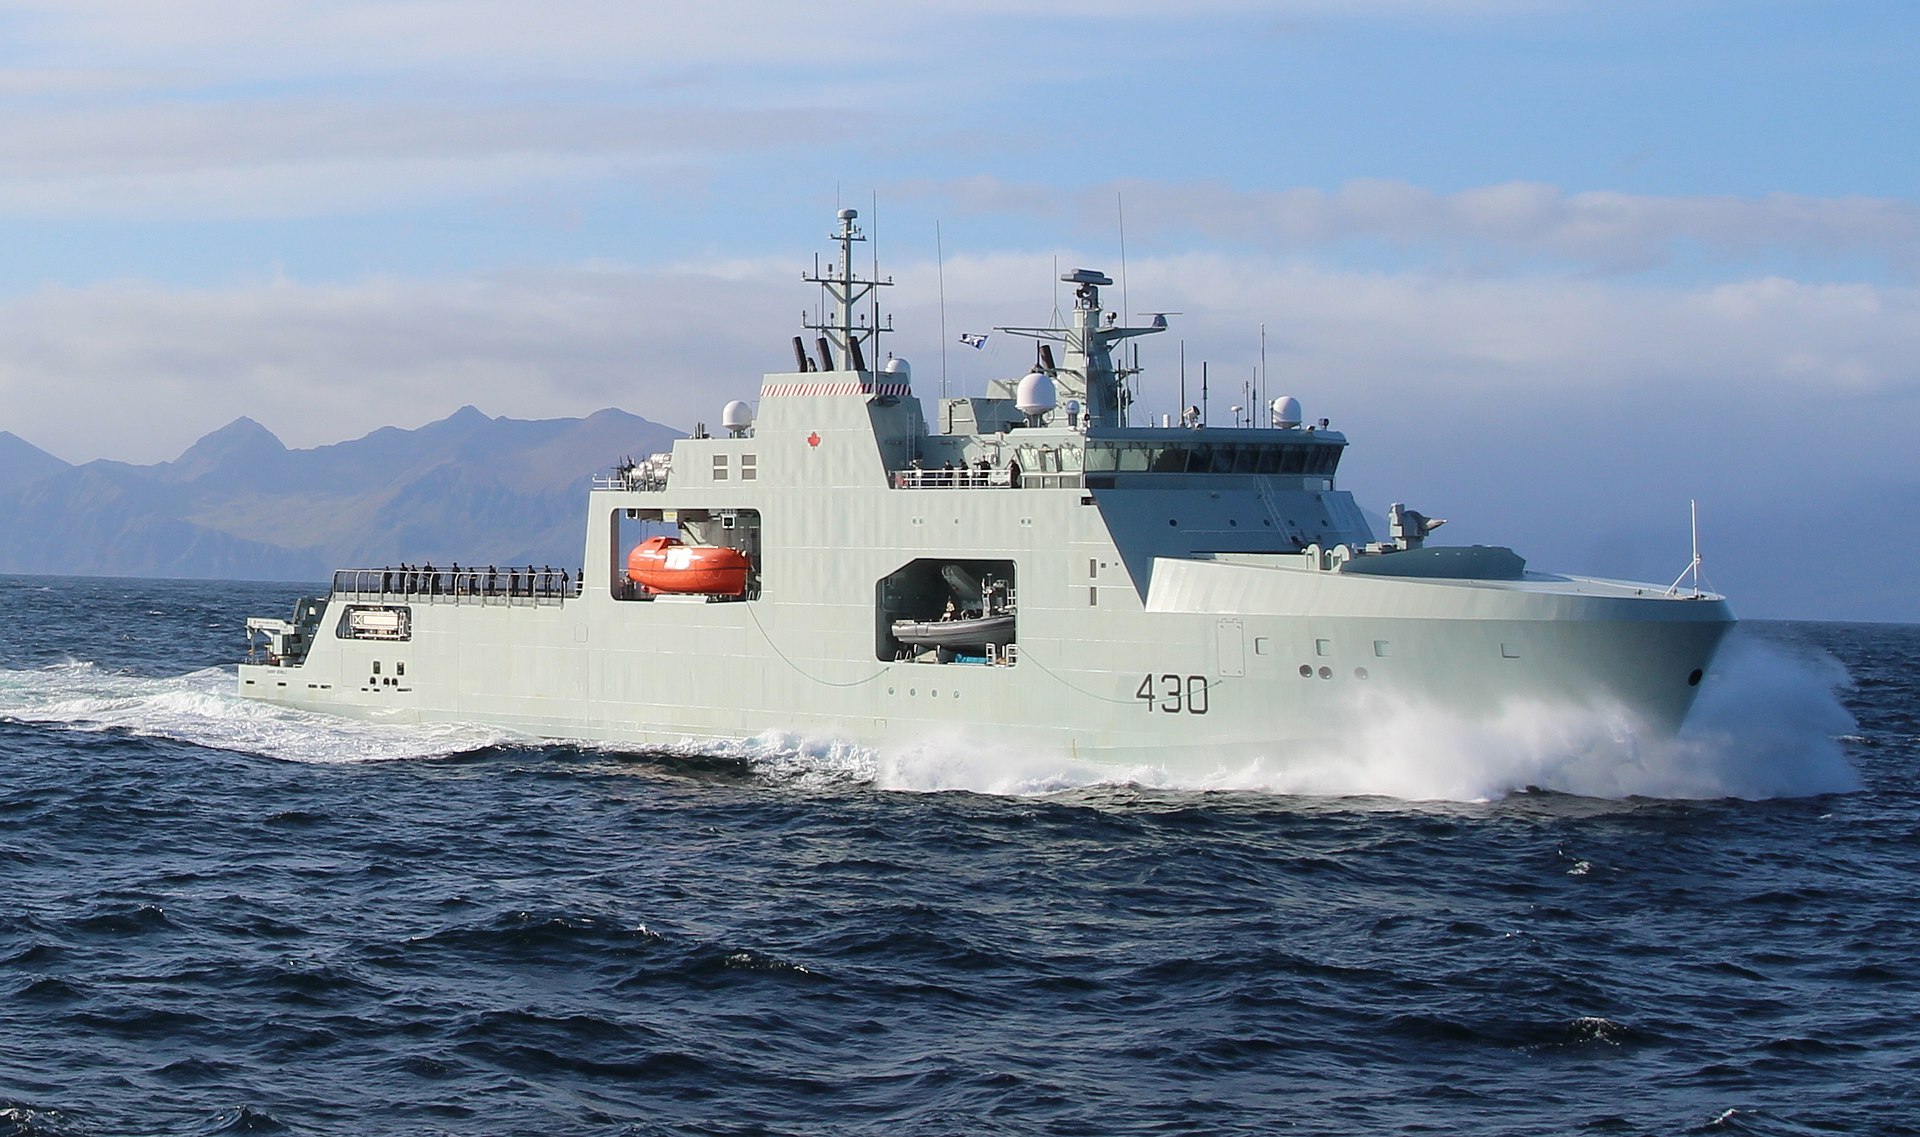 Modern CFB naval ship to arrive at new homeport in Esquimalt on Monday [Video]